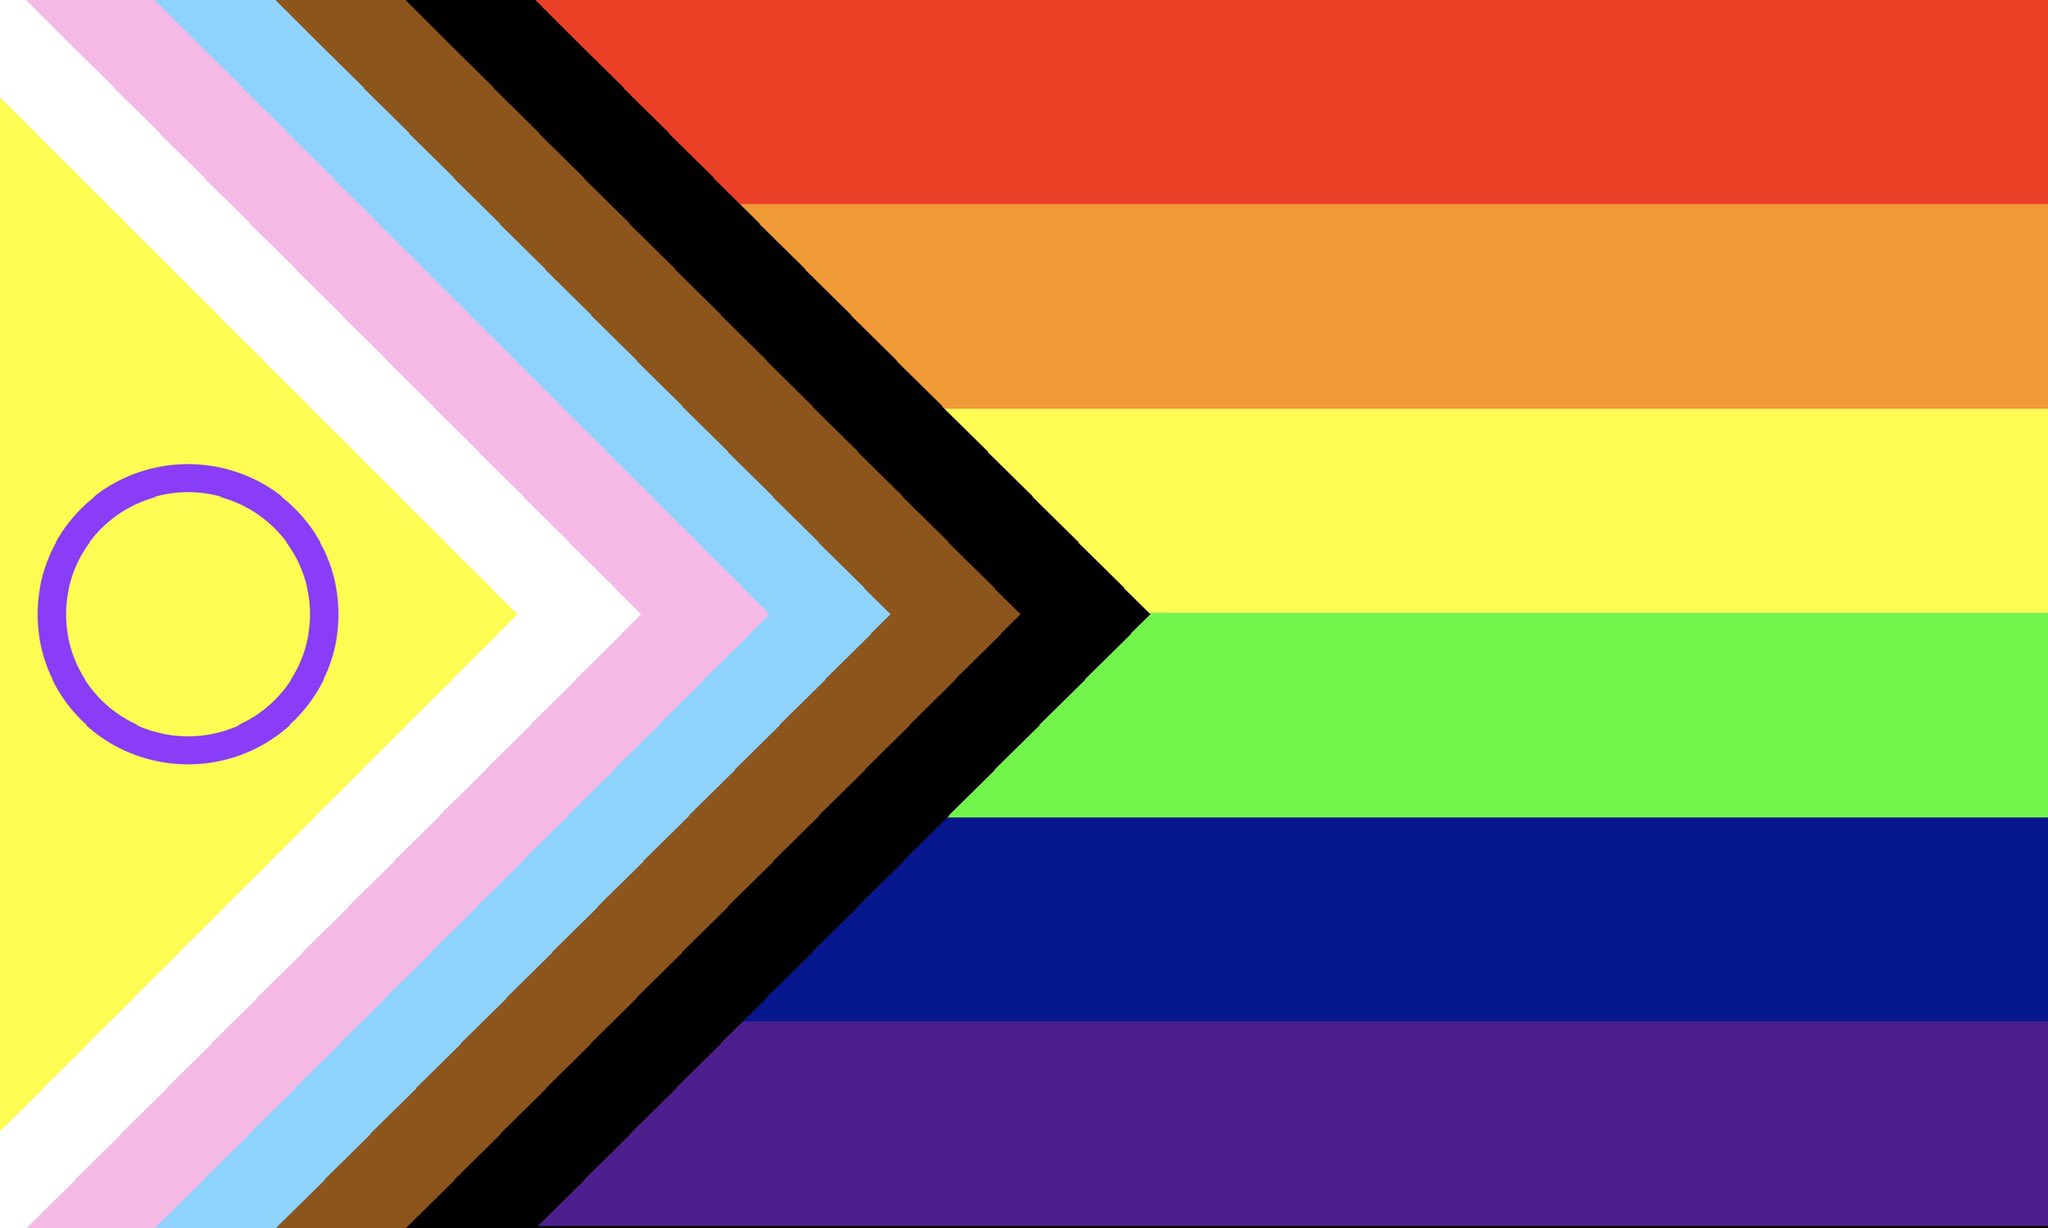 an intersectional LGBT pride flag, featuring the 6-color rainbow LGBT pride flag. the colors of the transgender pride flag, a brown stripe and a black stripe for antiracism are overlaid as a chevron. within the chevron is a purple curcle on a yellow field, representing intersex pride.